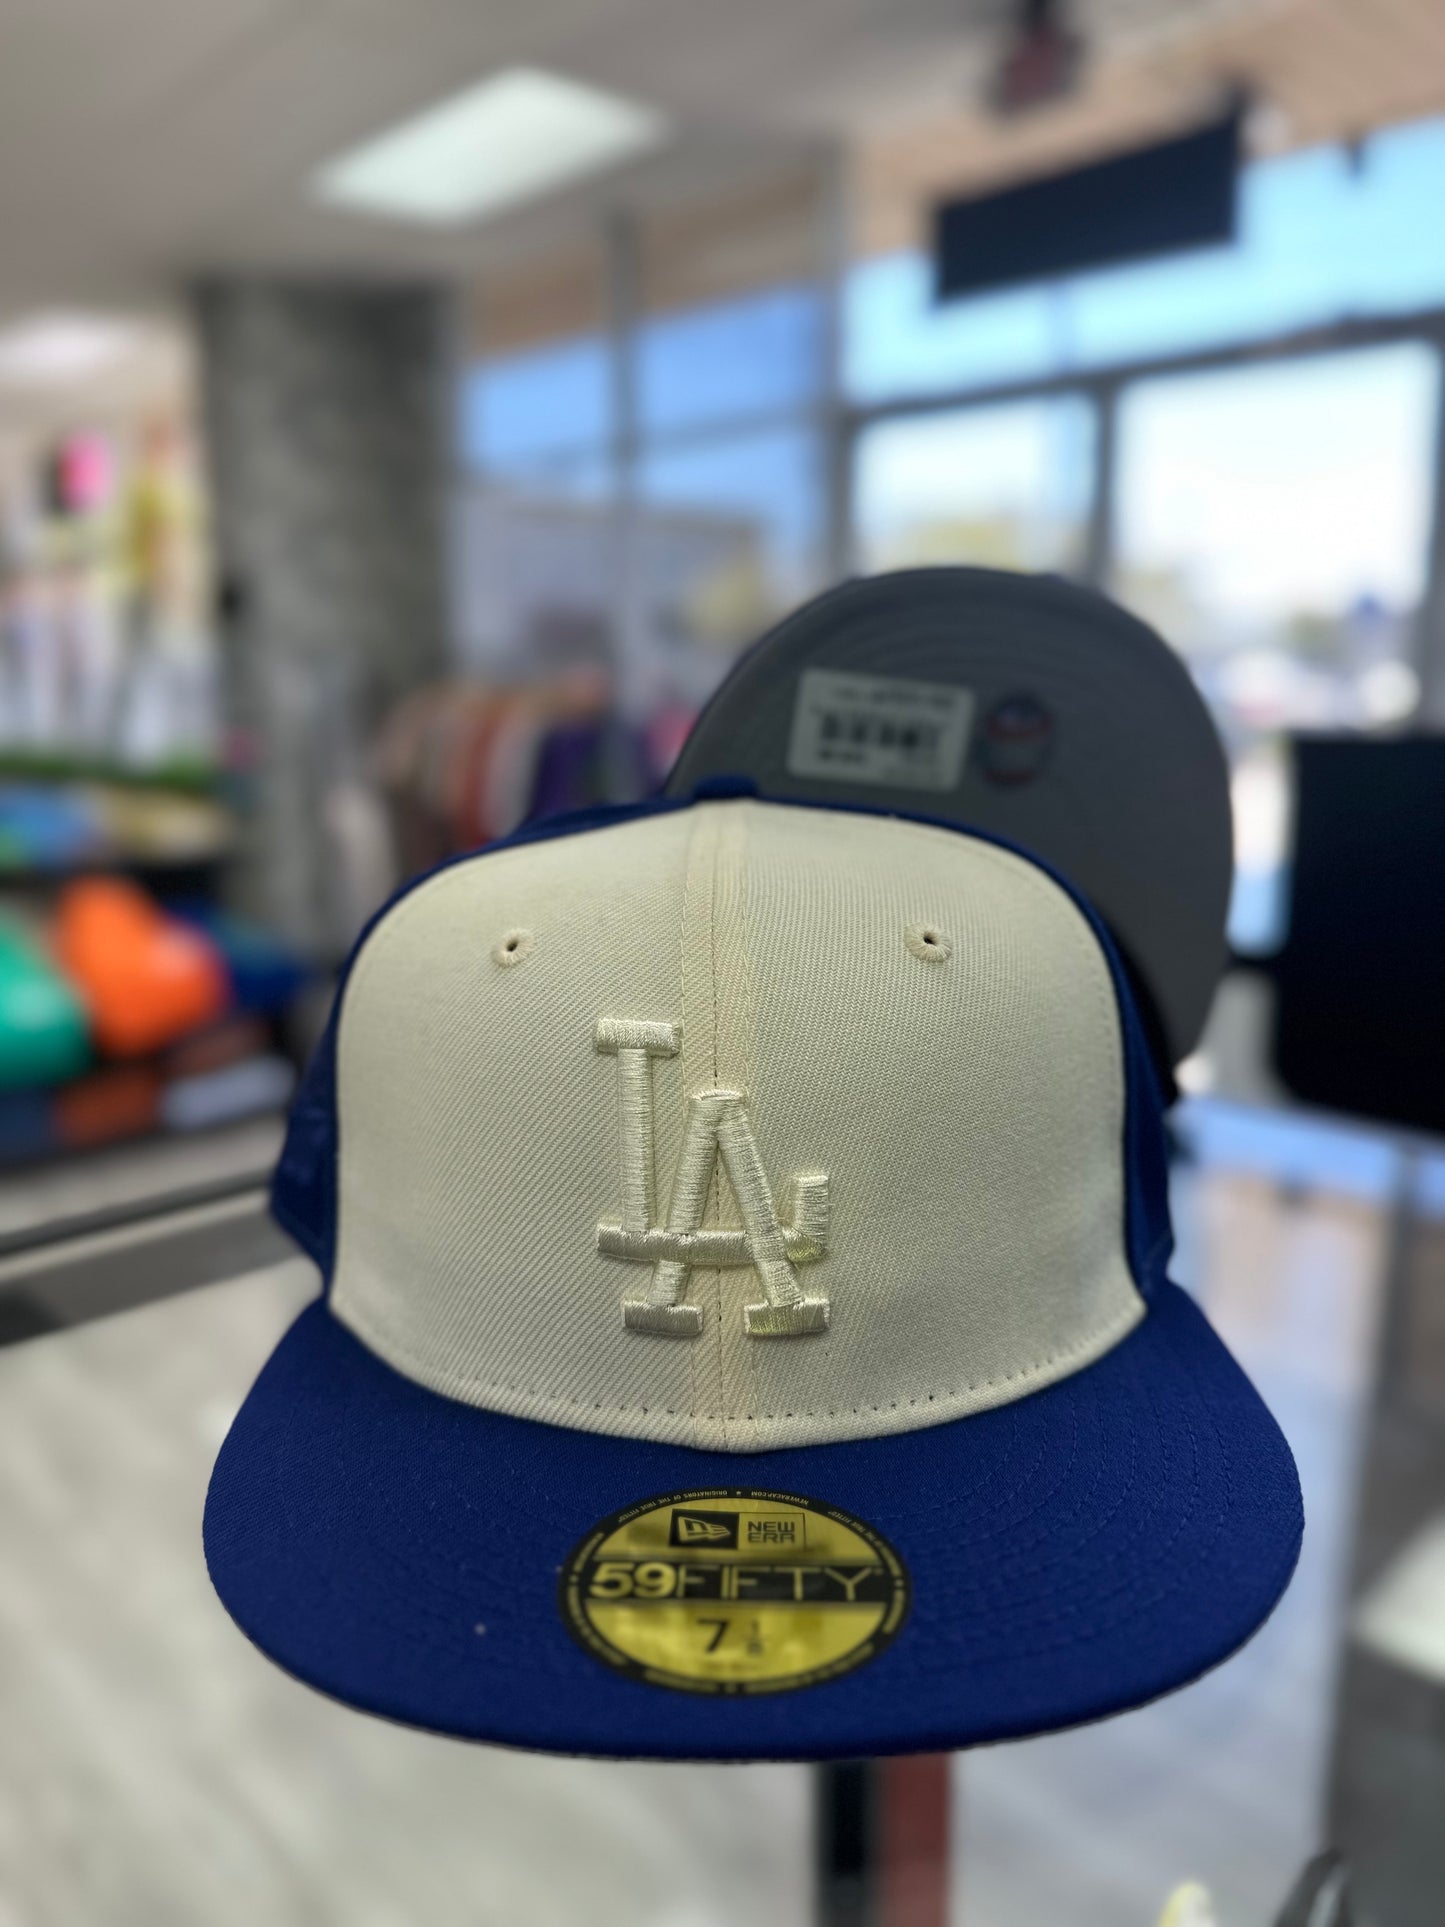 The Los Angeles Baseball Hat in Royal Blue